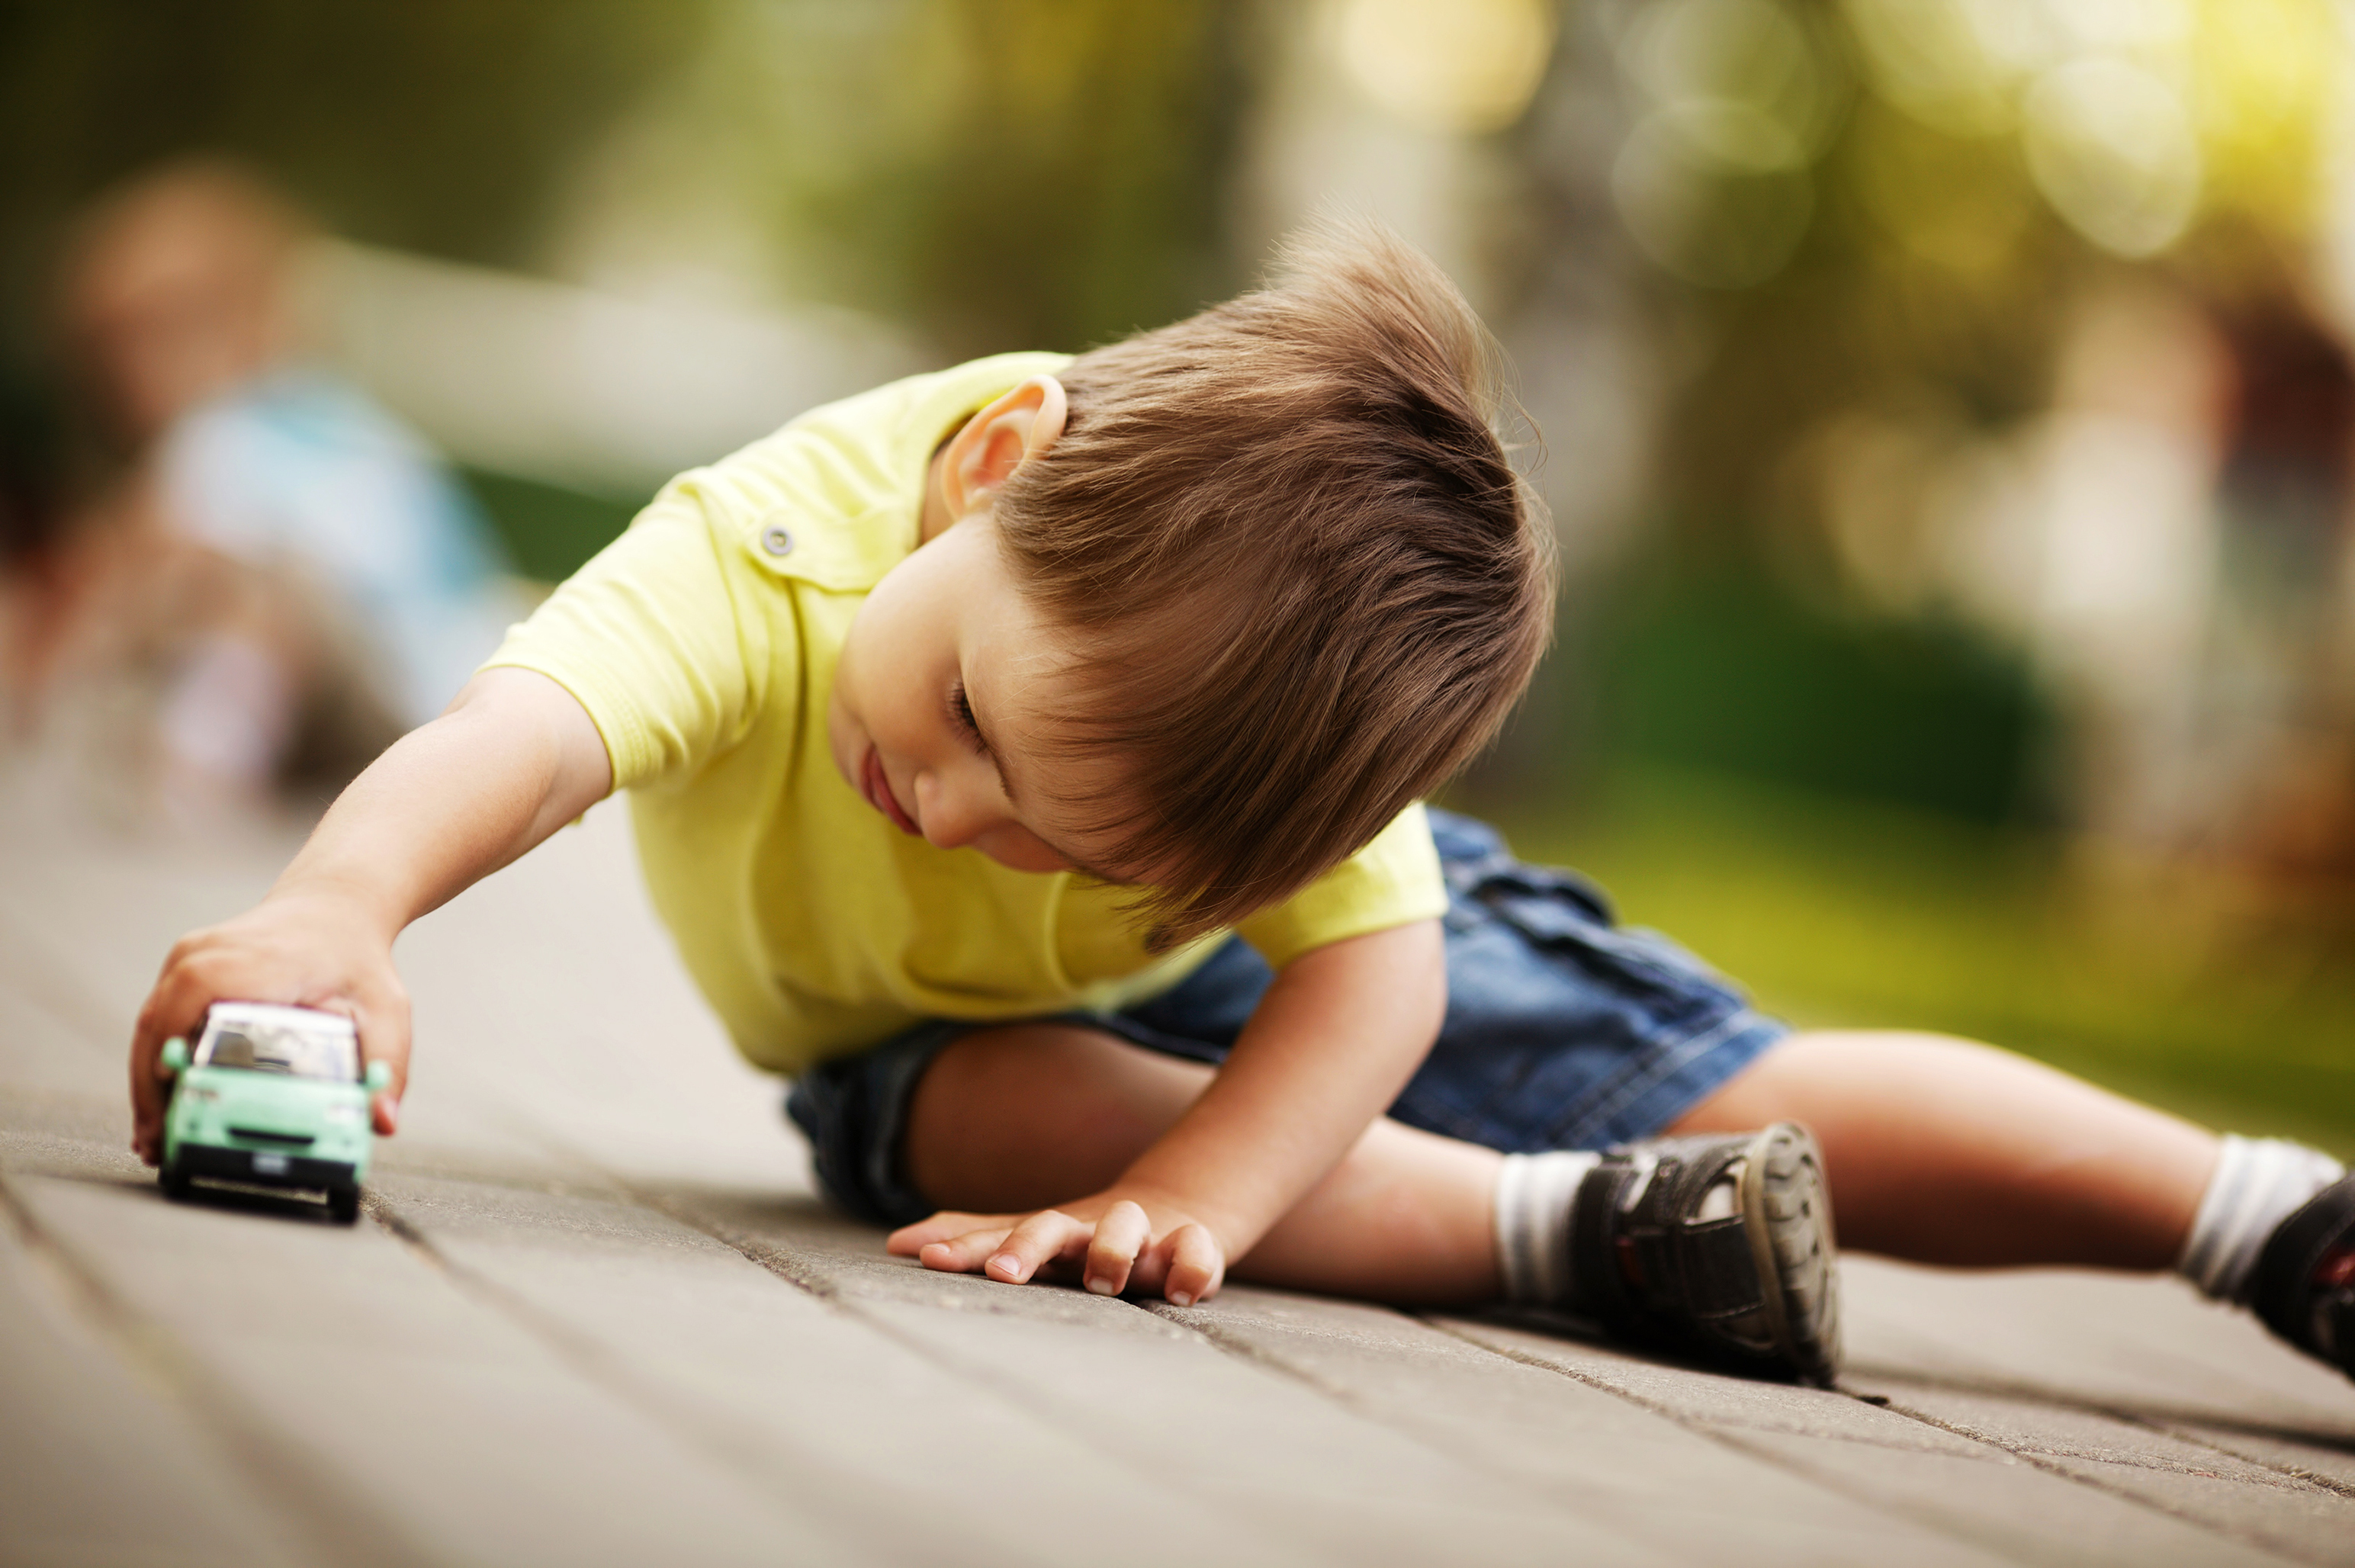 How researchers are helping young children with challenging behaviors